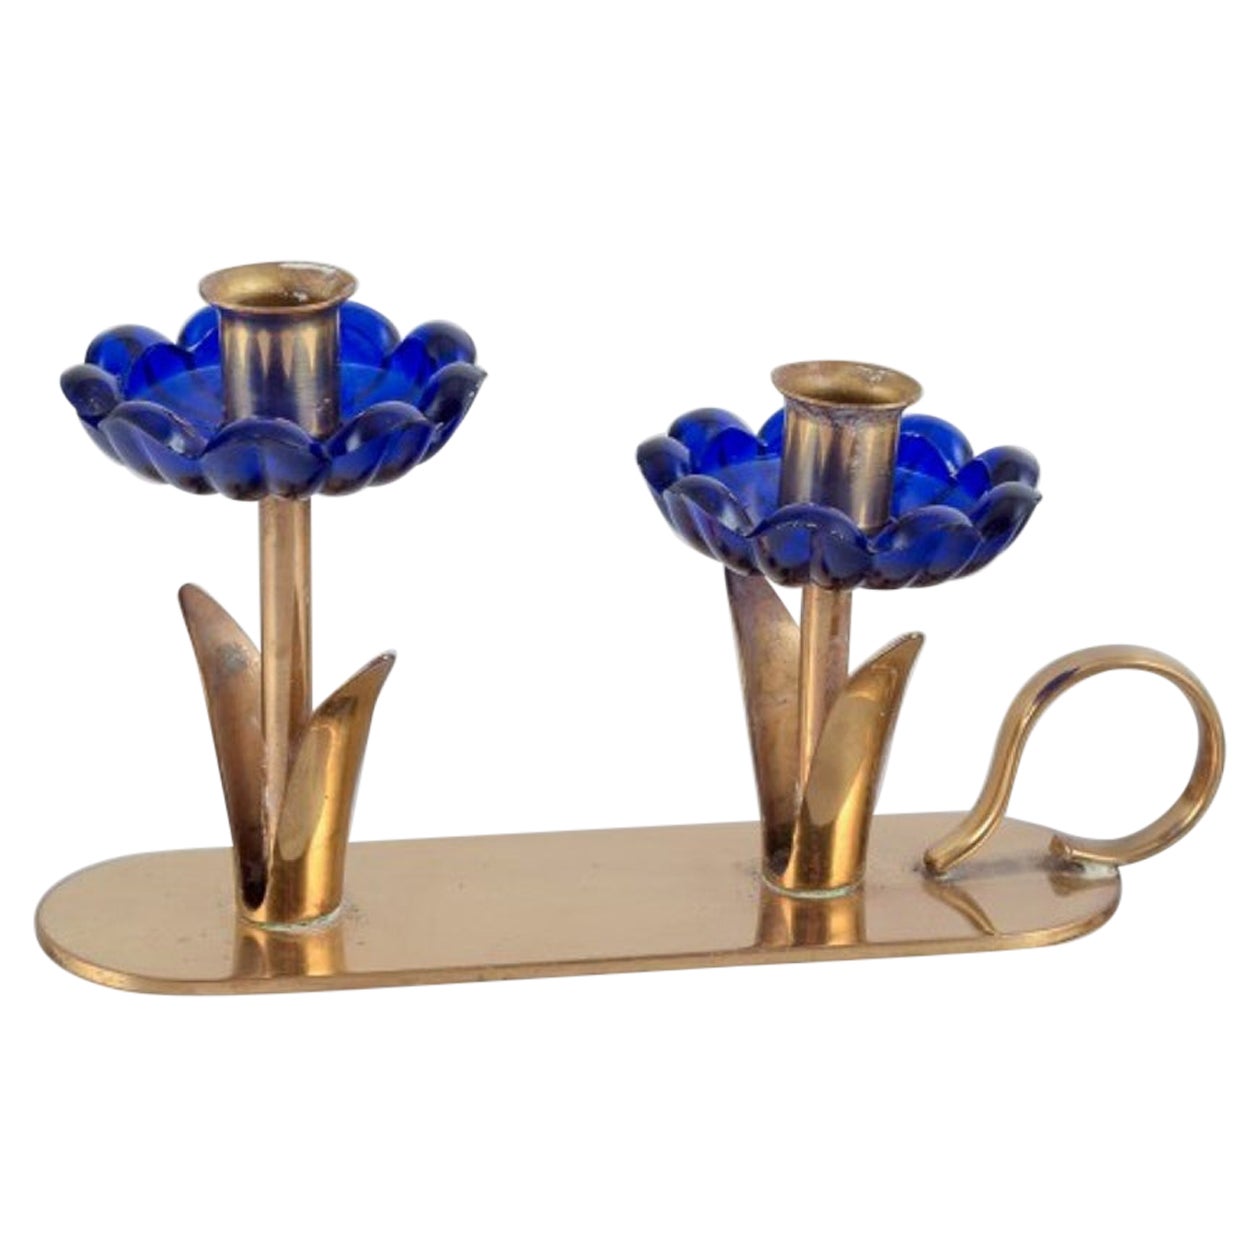 Gunnar Ander for Ystad Metall.  Candlestick holder in brass and blue art glass